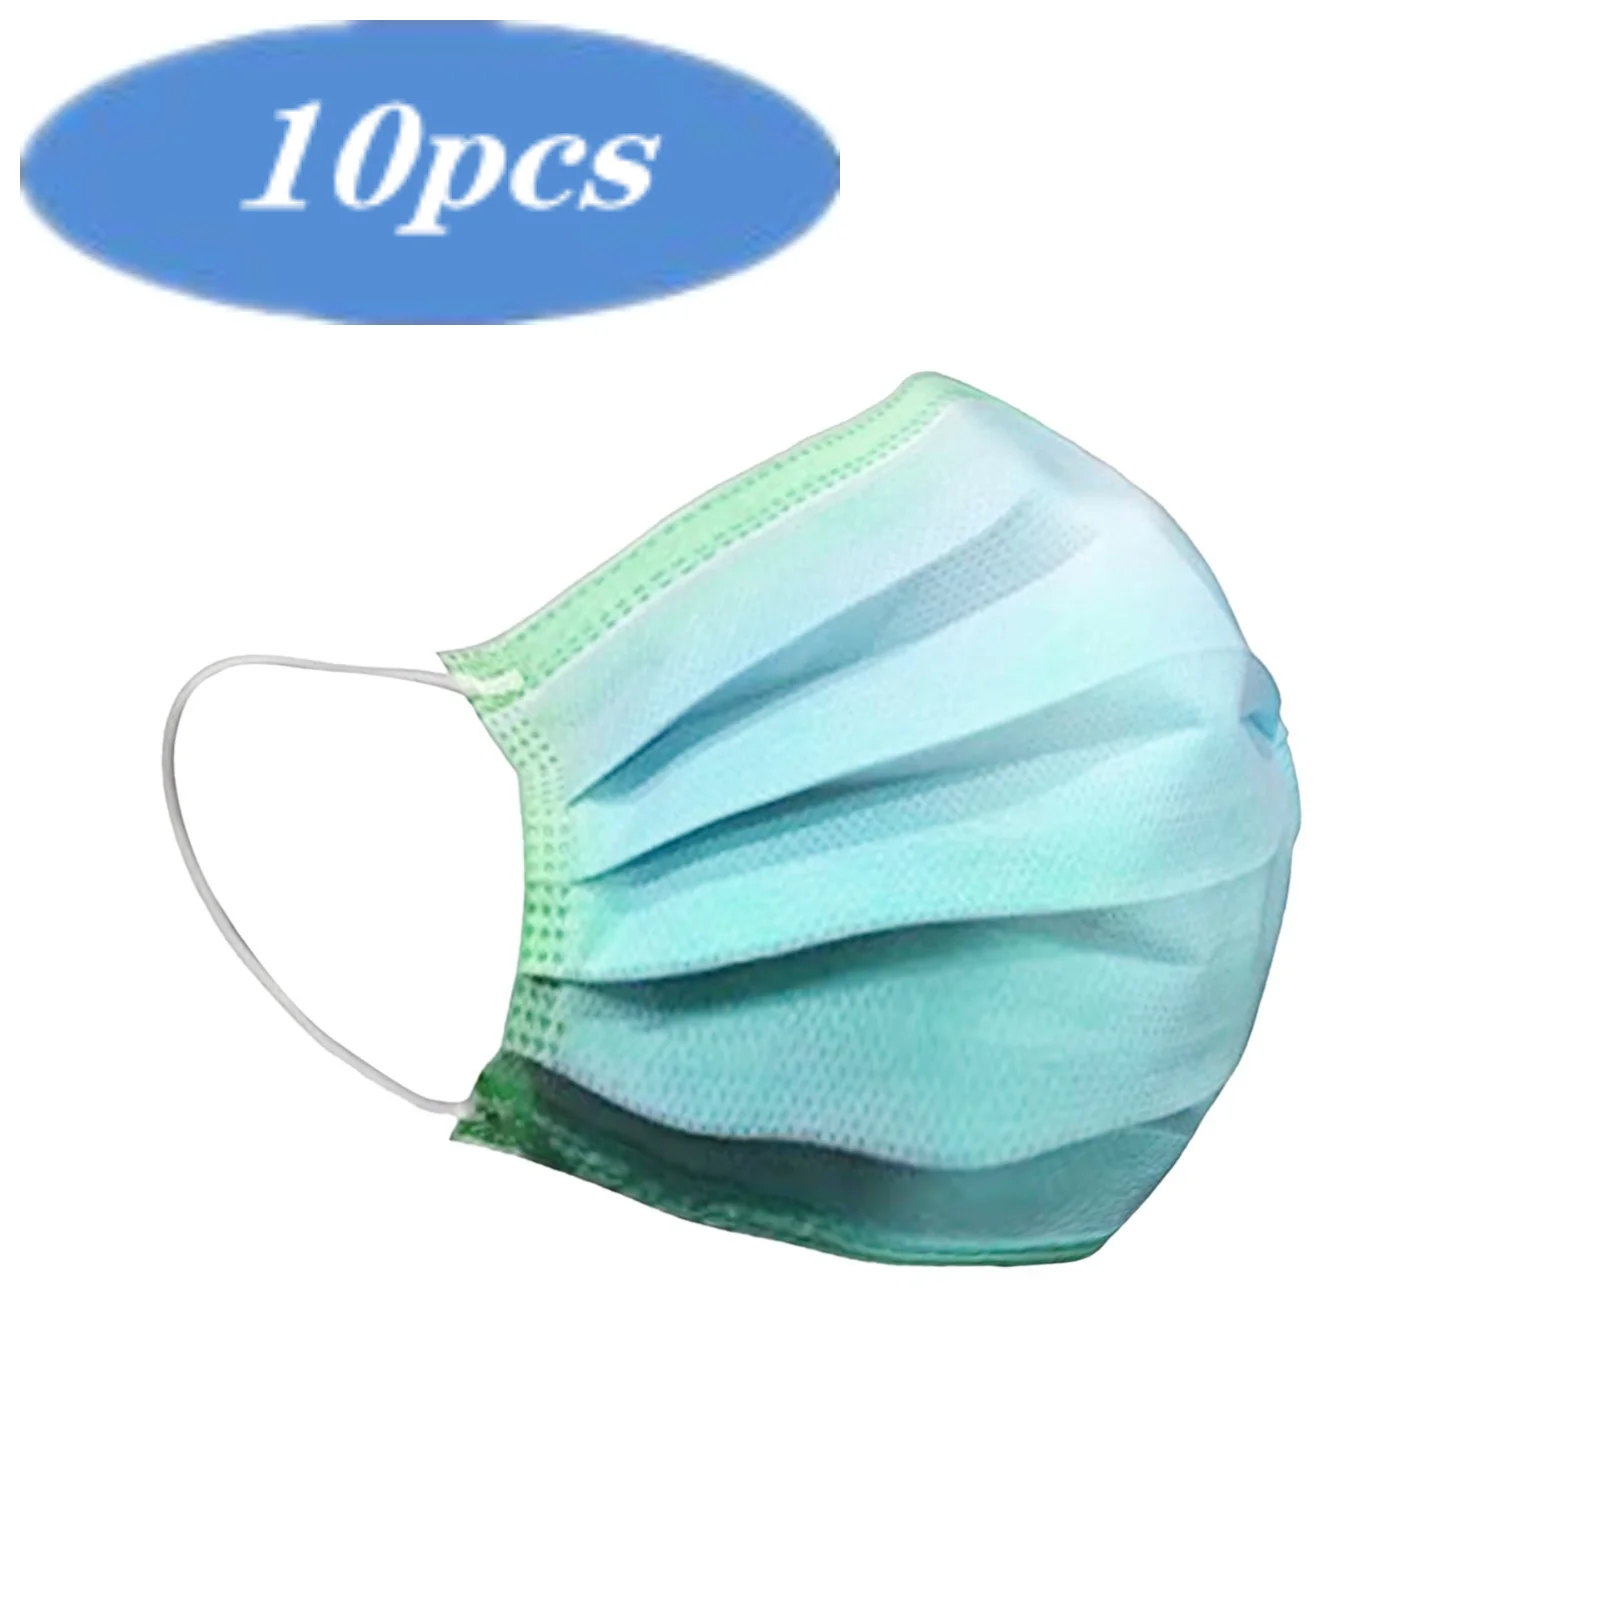 

10pcs Disposable Face Mask adult Tie-dye Covers Fashion Mouths 3-ply Protective Earloop Masks Halloween Cosplay Mascarillas